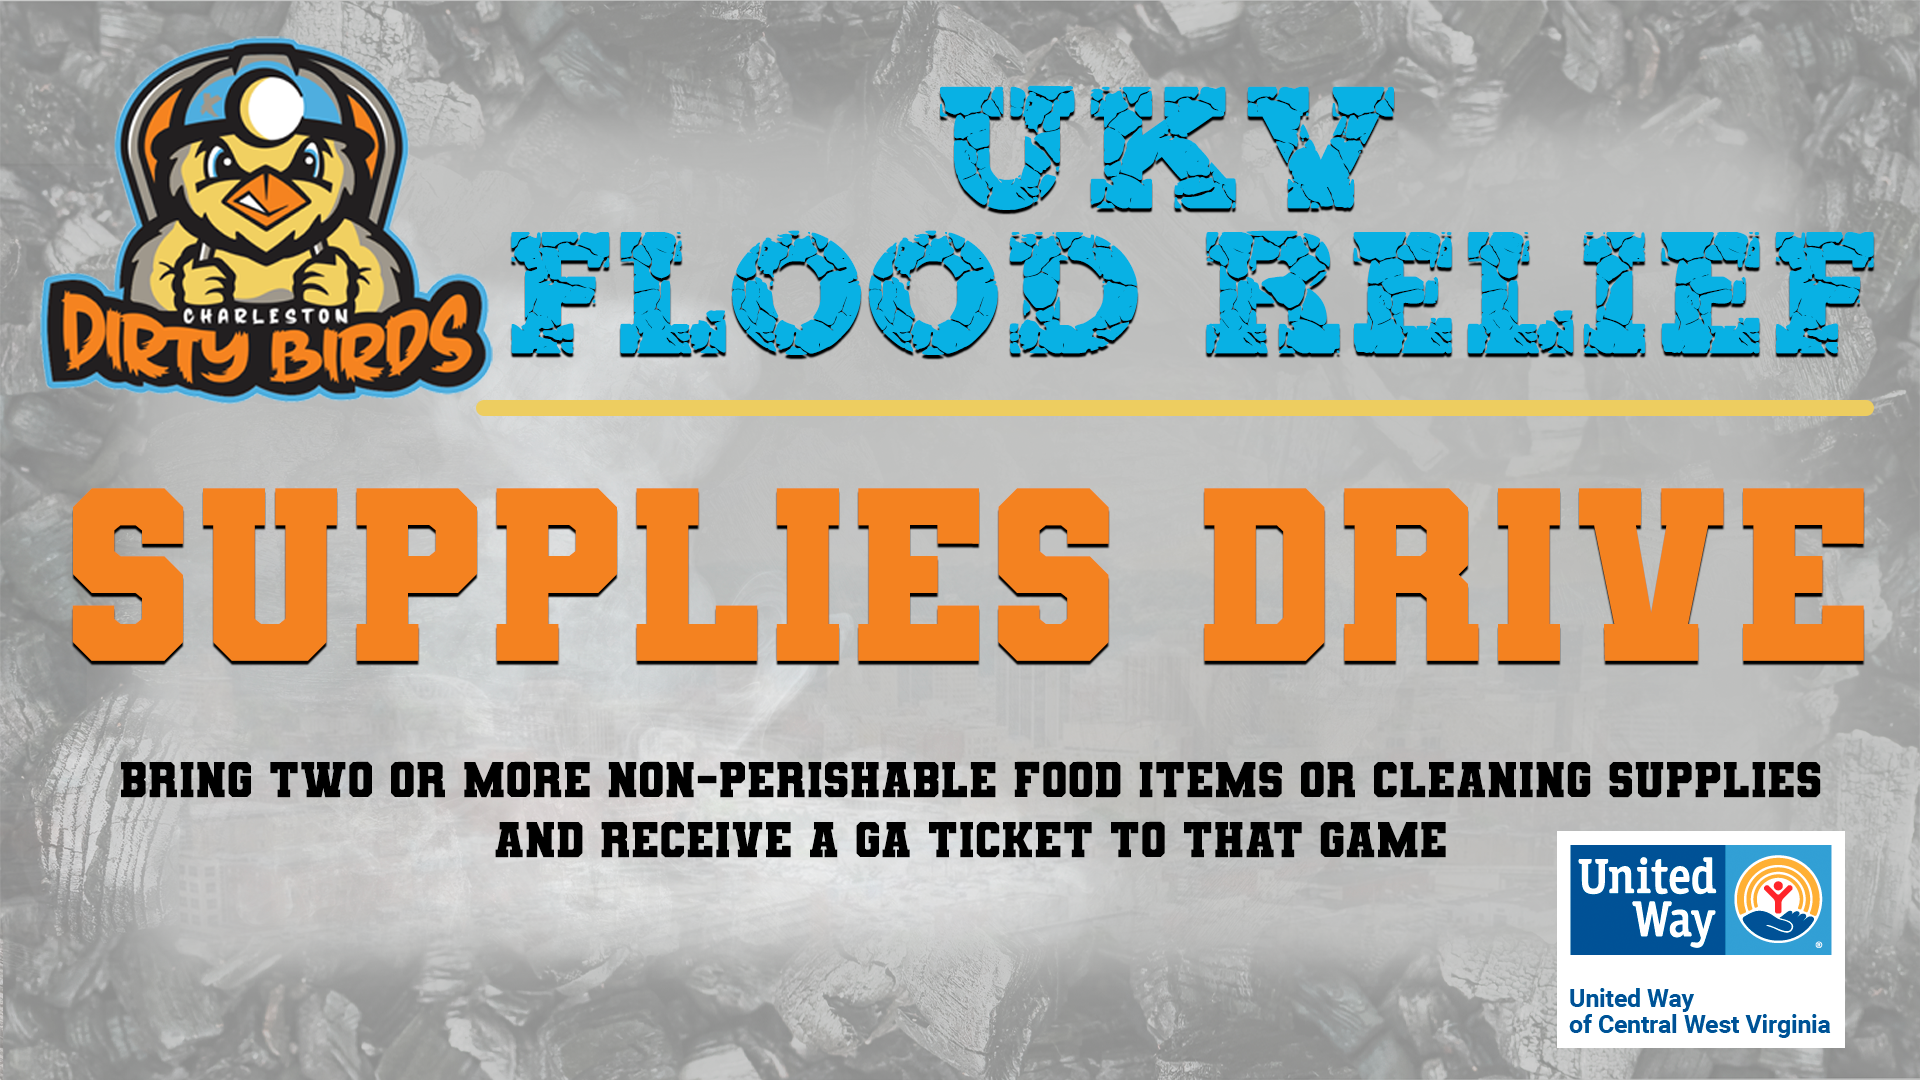 UNITED WAY AND DIRTY BIRDS TEAM UP FOR FLOOD ASSISTANCE